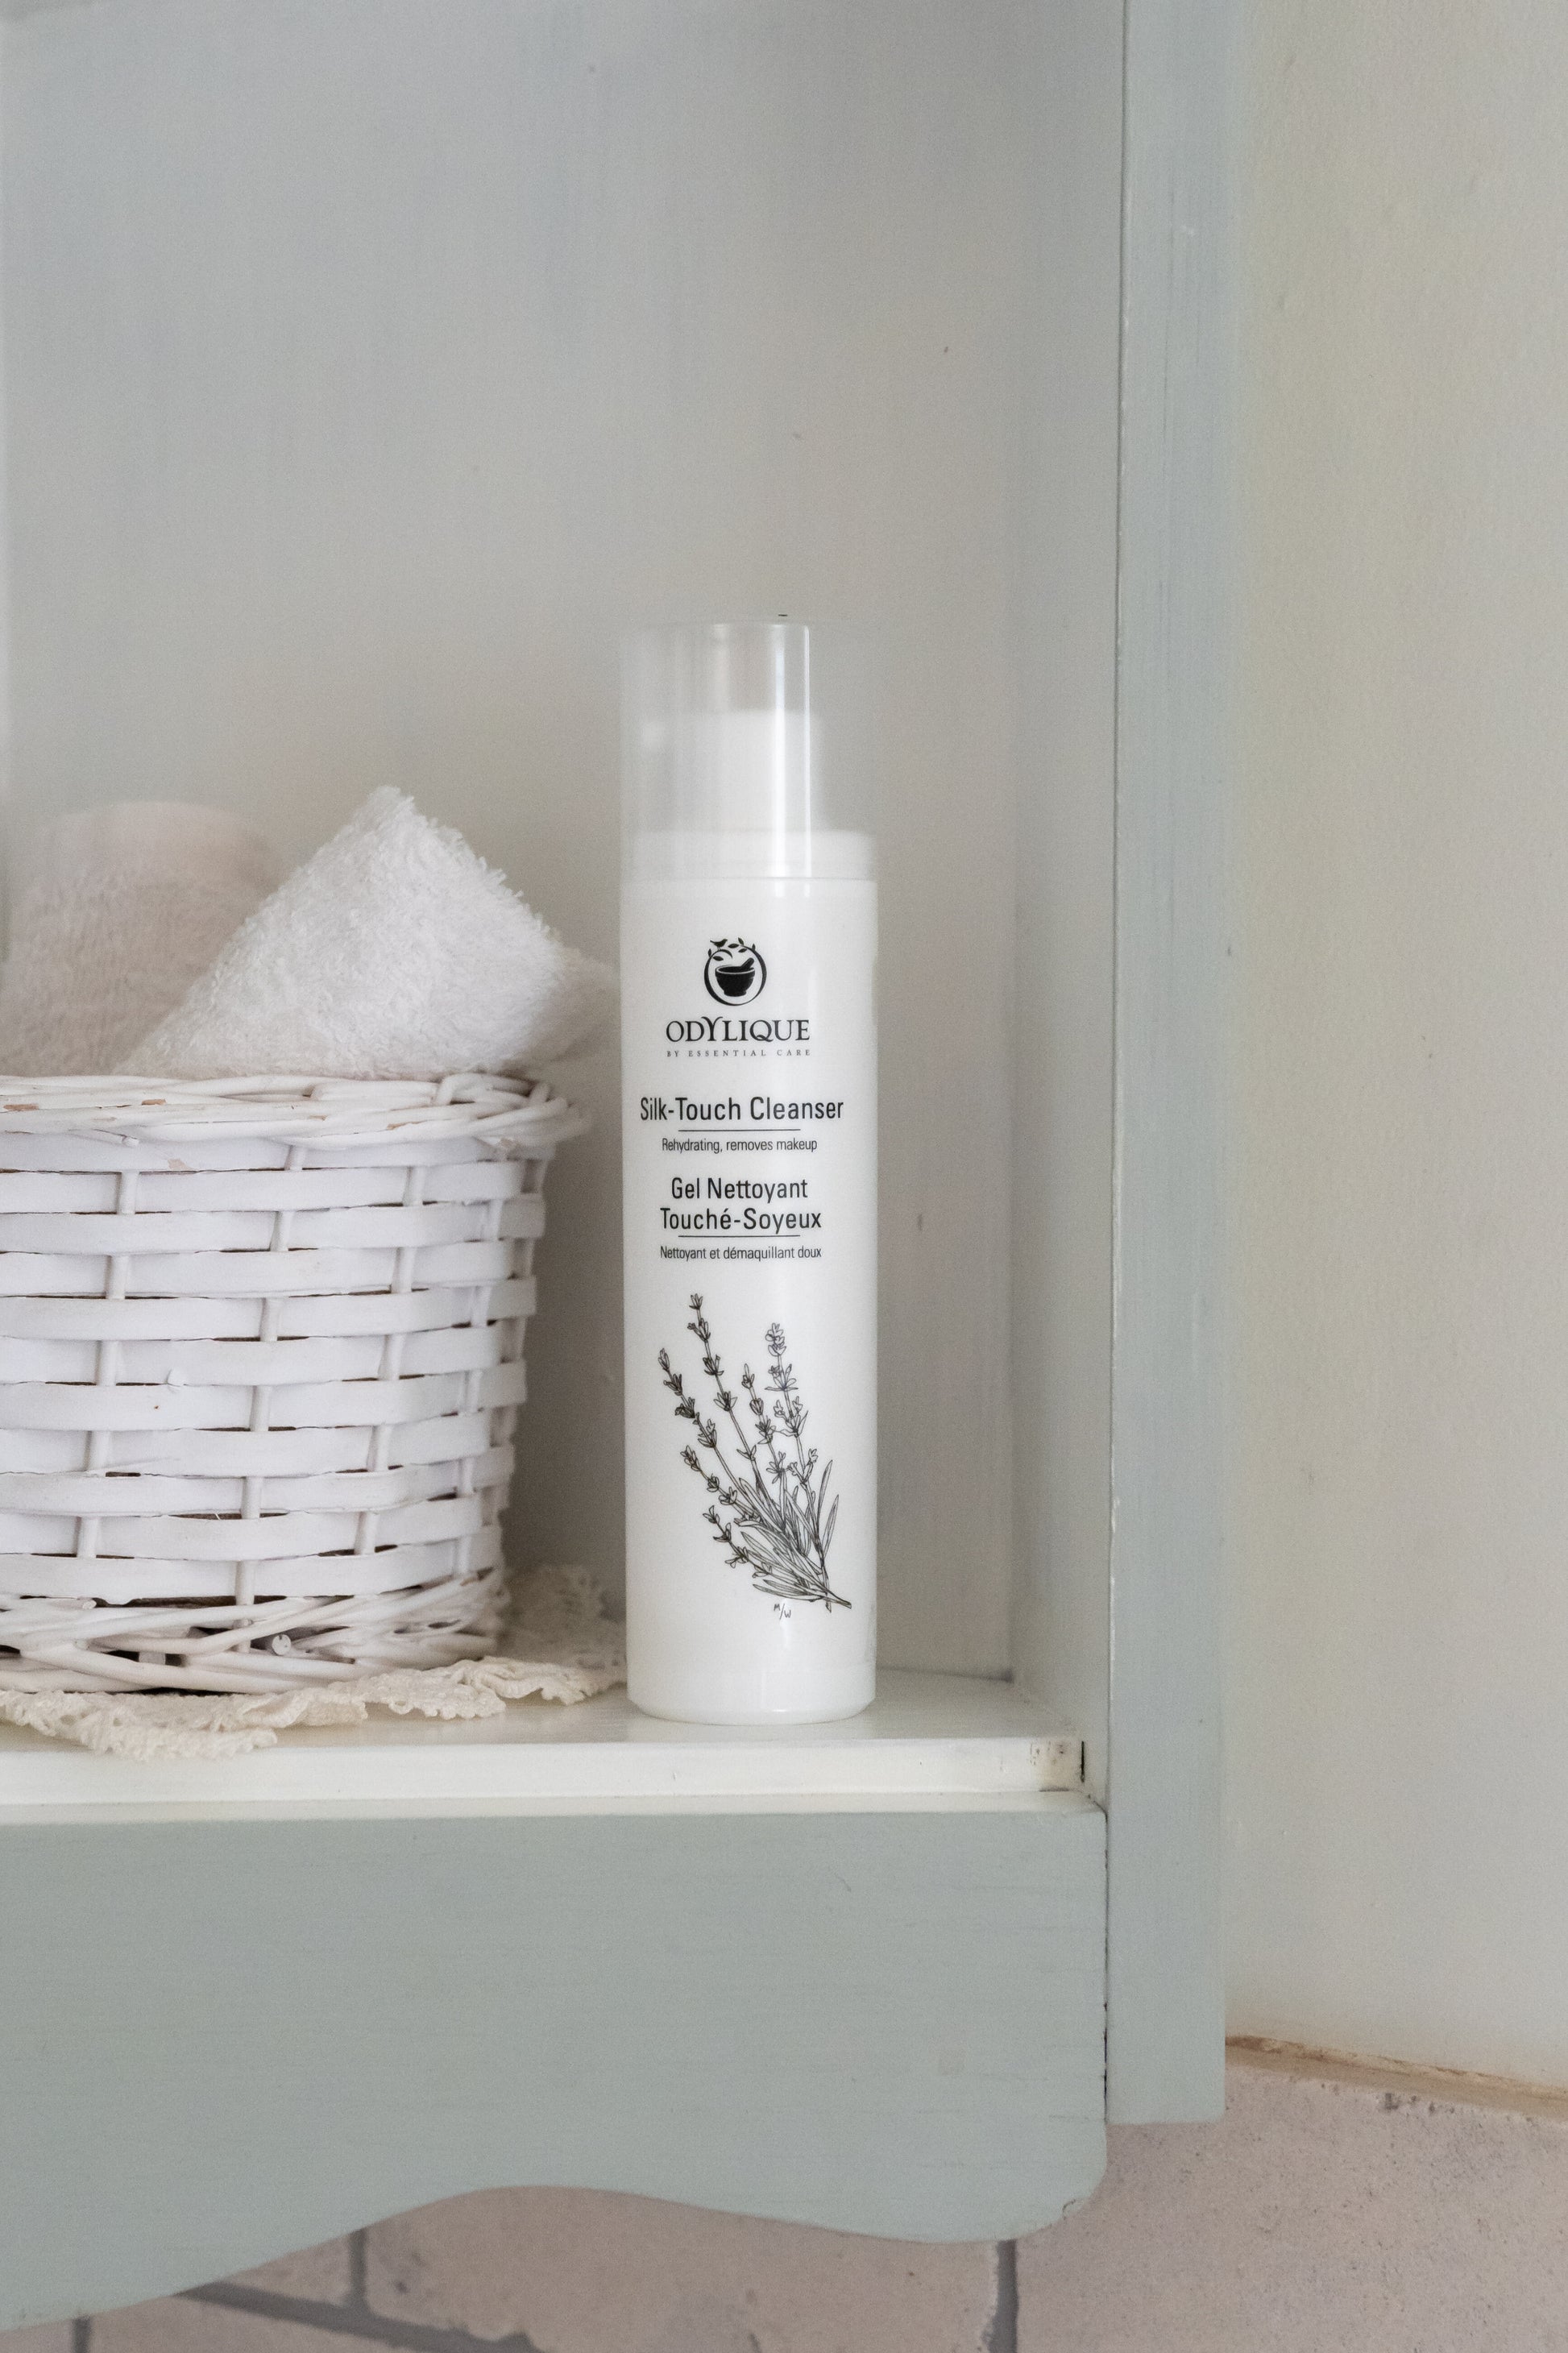 odylique silk touch cleanser for very dry, mature skin sitting on shelf in bathroom next to a white wicker basket with white fluffy face towels peeking out